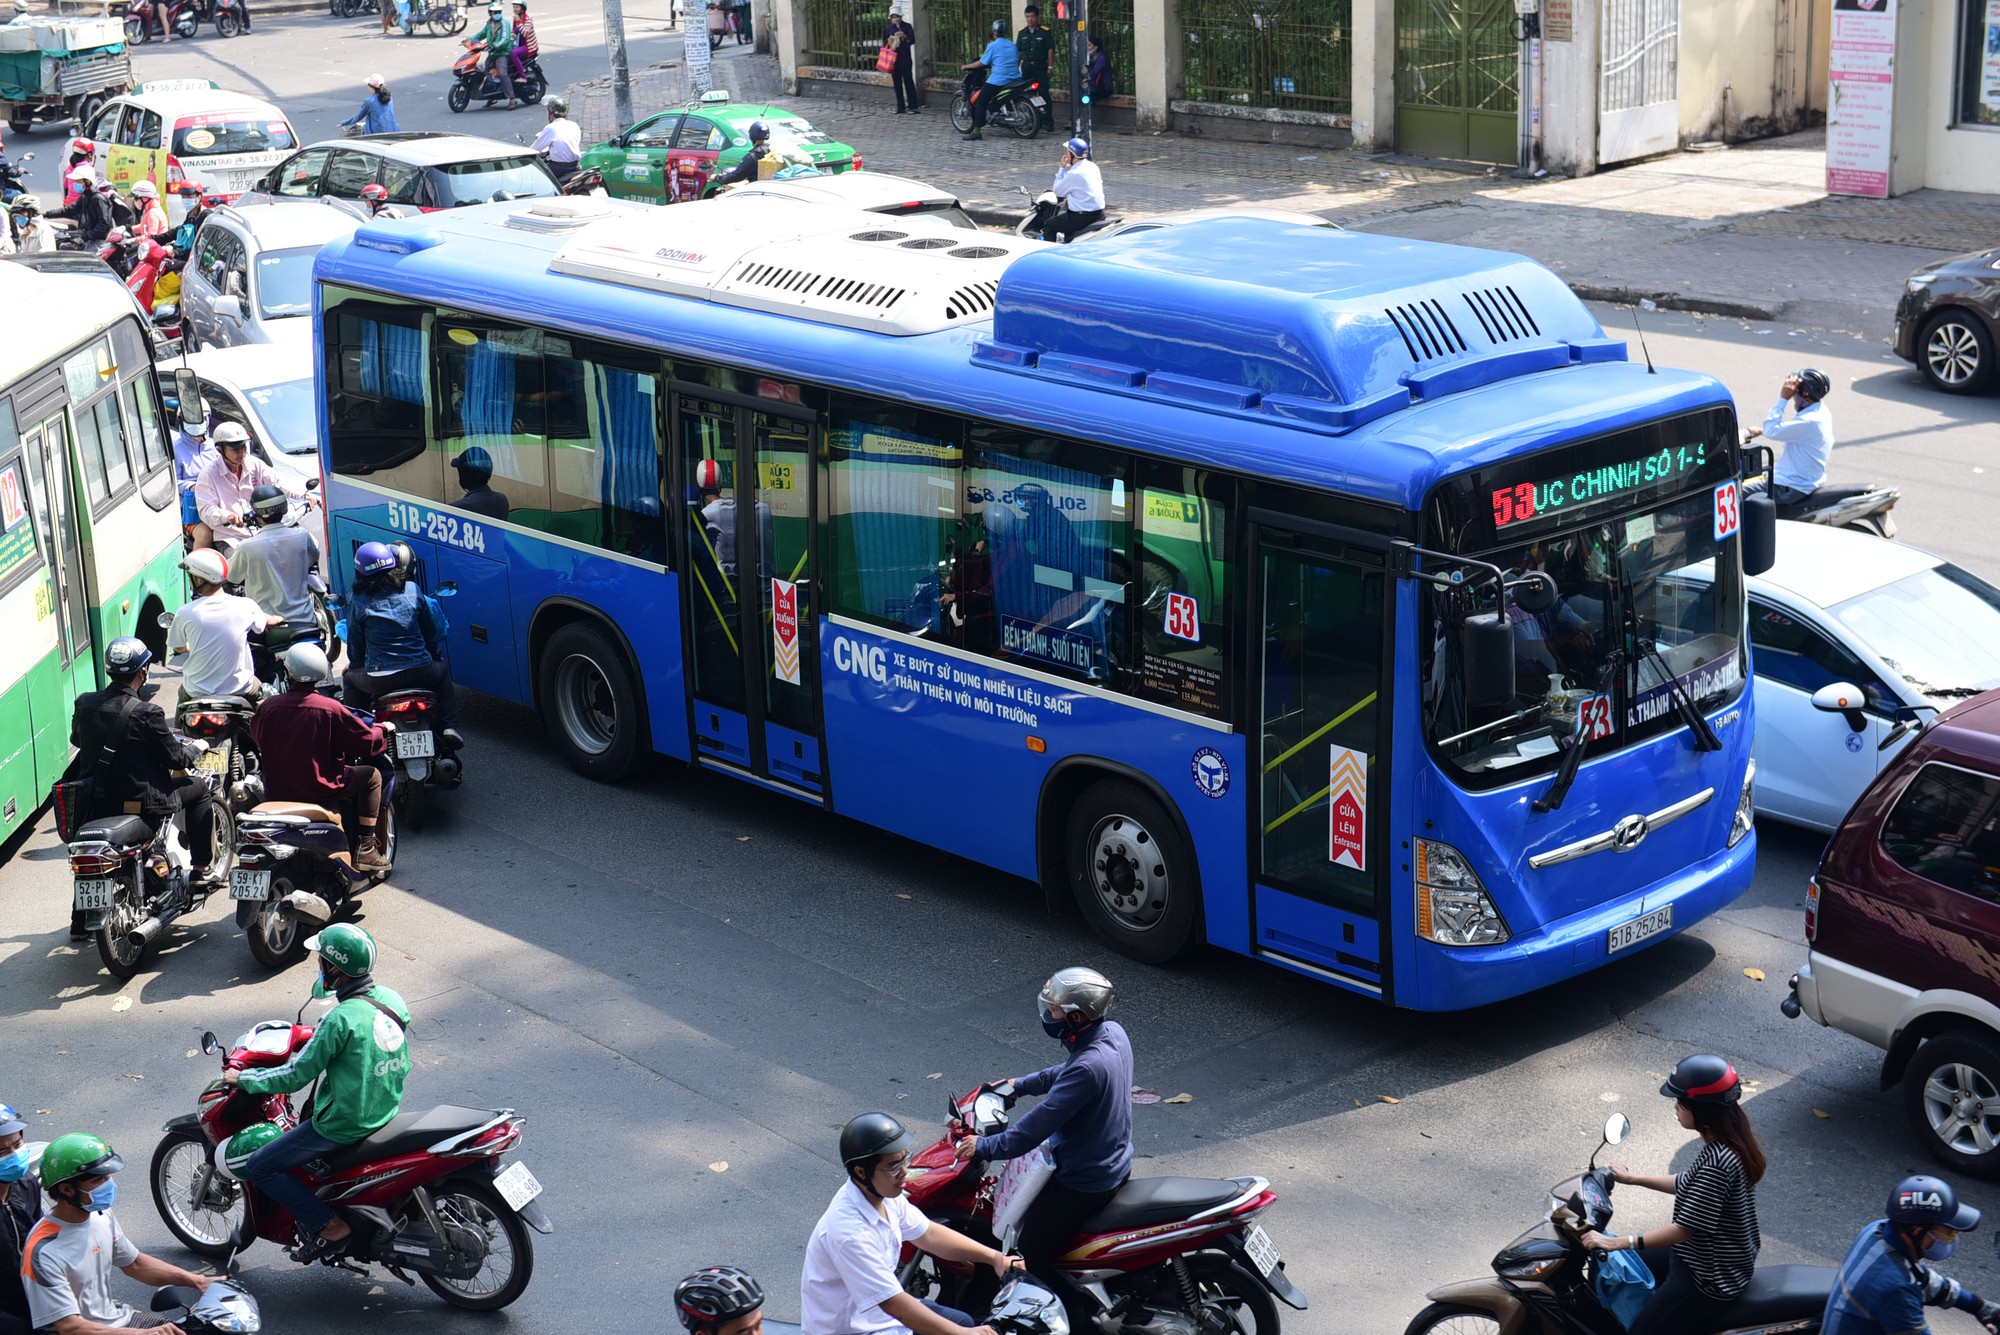 'Vietnam has an amazing system that allows you to catch local buses between regional centers'